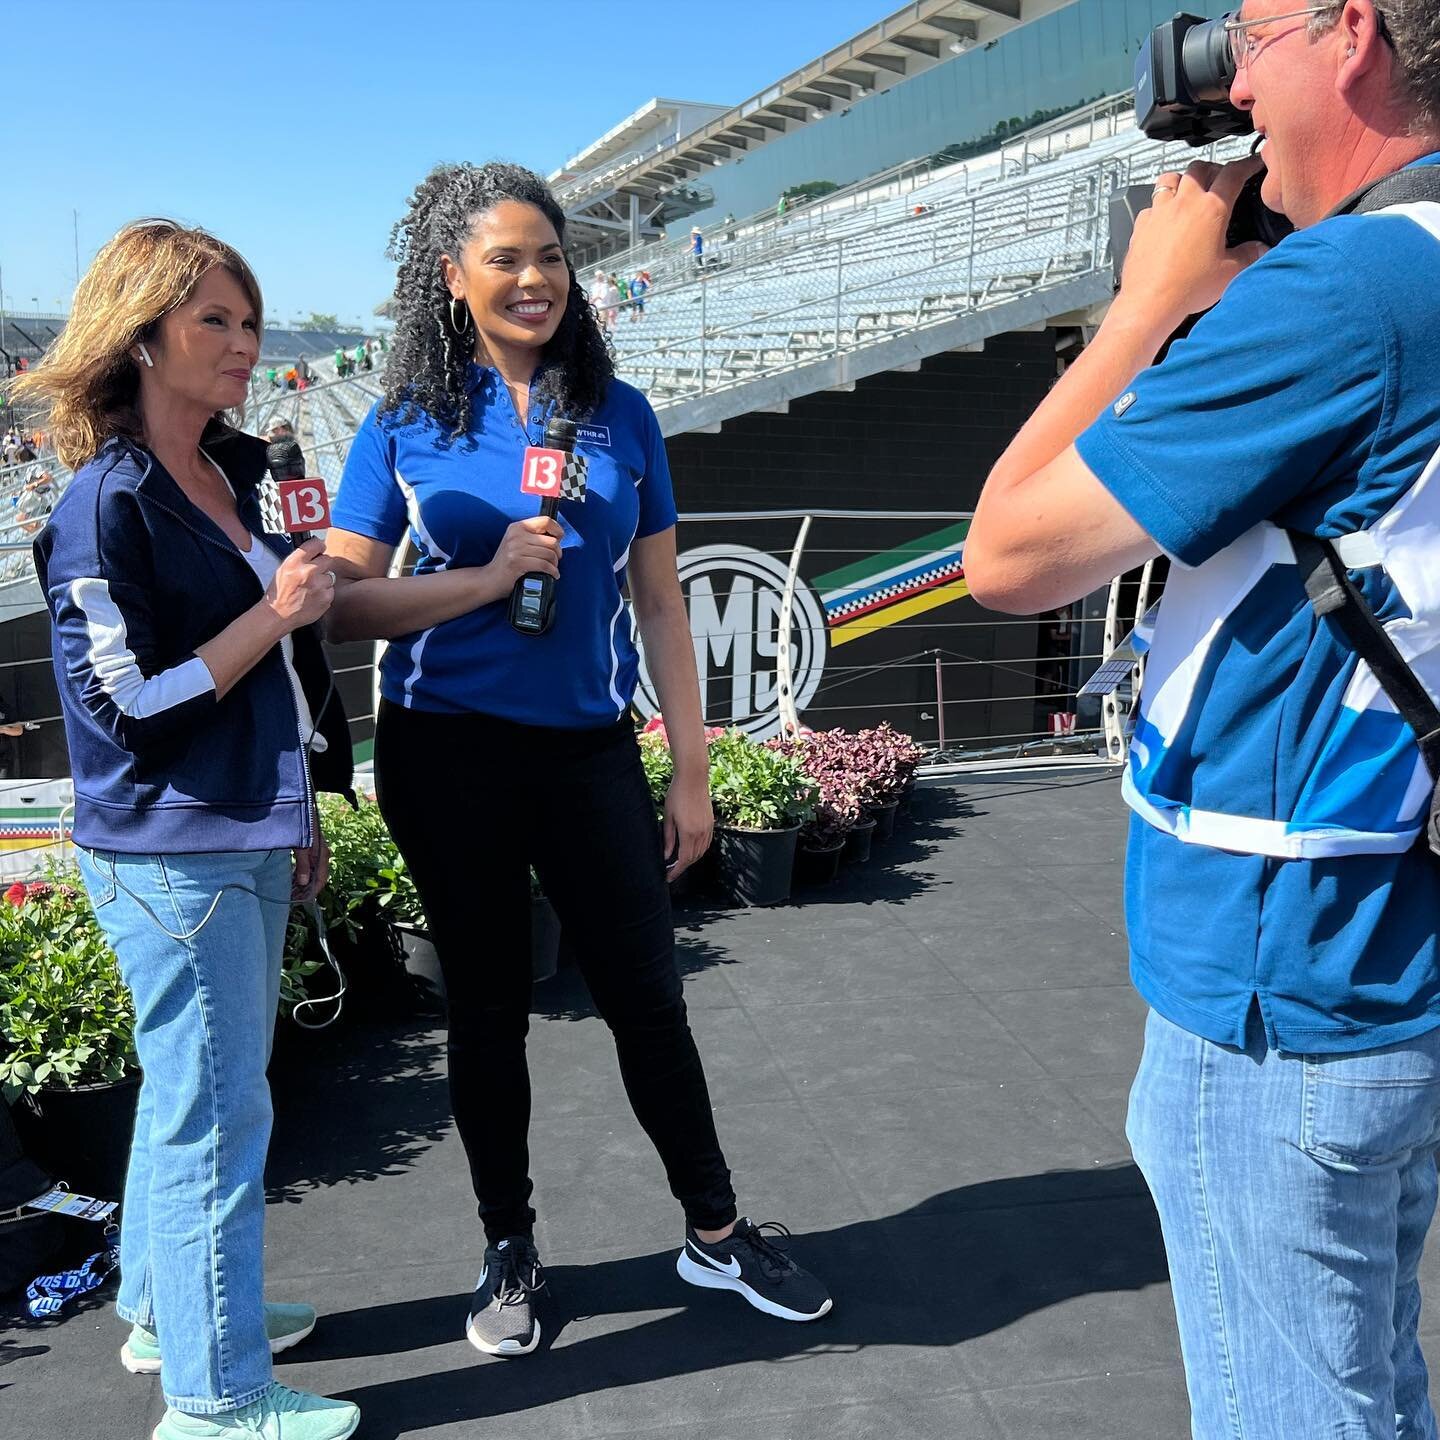 An awesome day of TV coverage at @indianapolismotorspeedway Thousands packed the track today and media from around the world is here to cover the 107th running of the #Indy500 !!! This weekend will be an exciting weekend!! 🏁🏁🏁🏁🏁🏁🏁🏁🏁🏁🏁
@wth